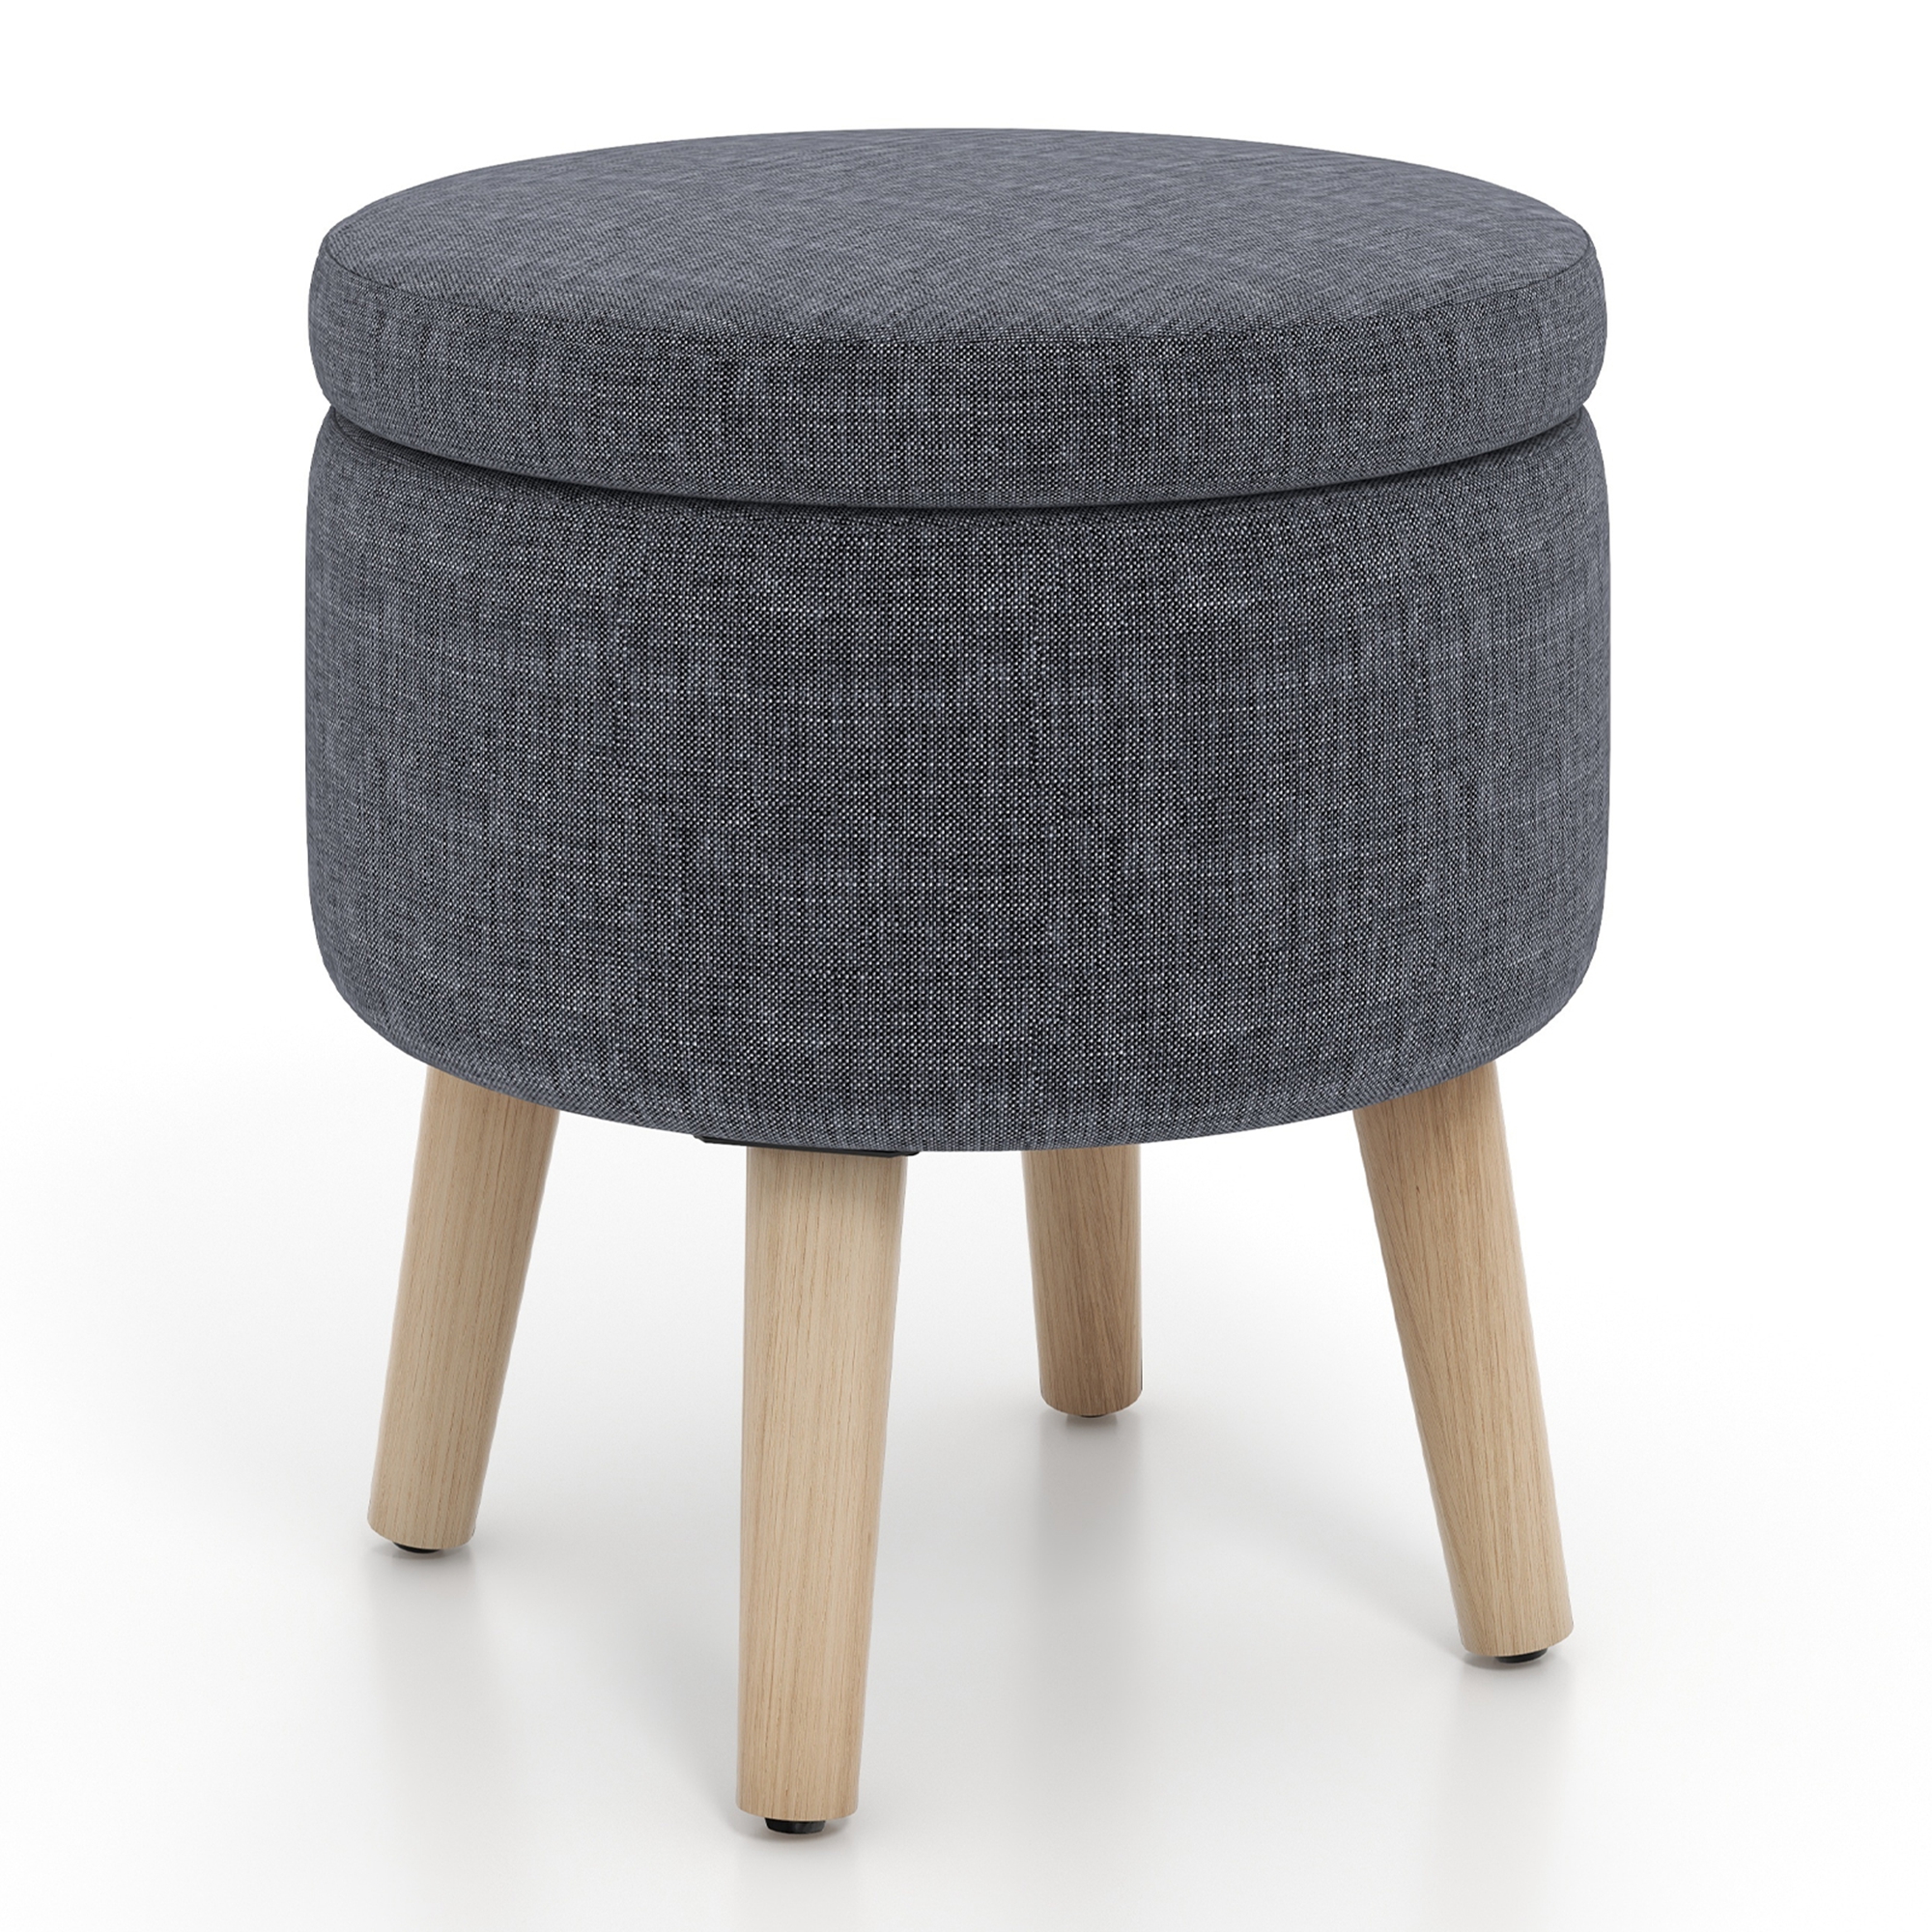 Costway Round Storage Ottoman Accent Storage Footstool with Tray for Living Room Bedroom Grey - image 1 of 10